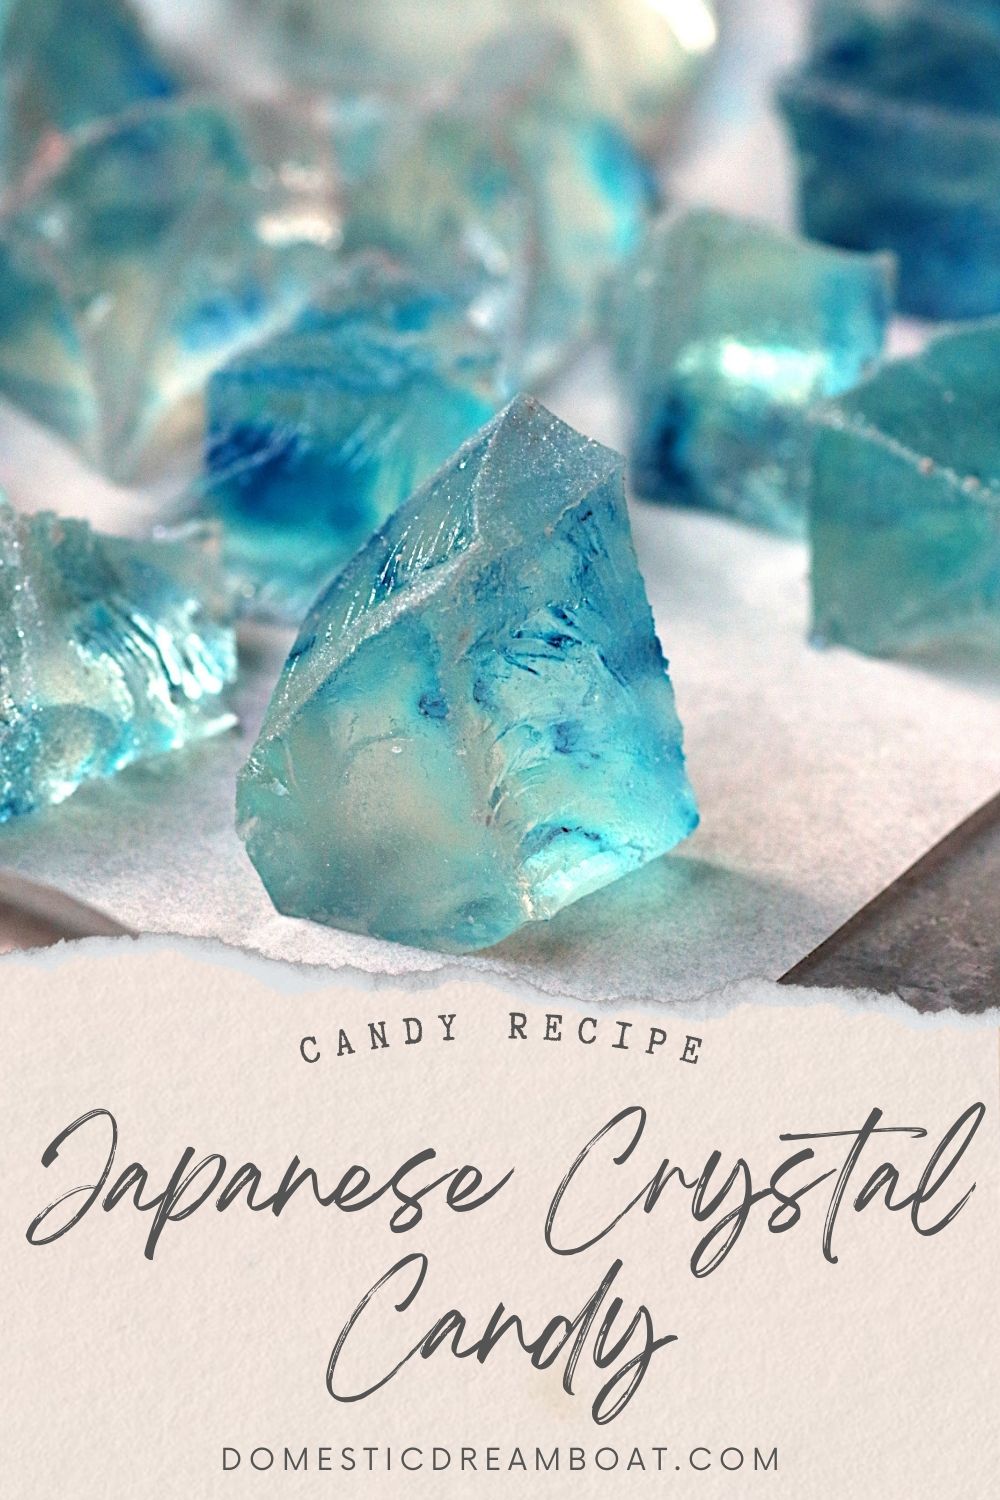 Crystal Candy Recipe 